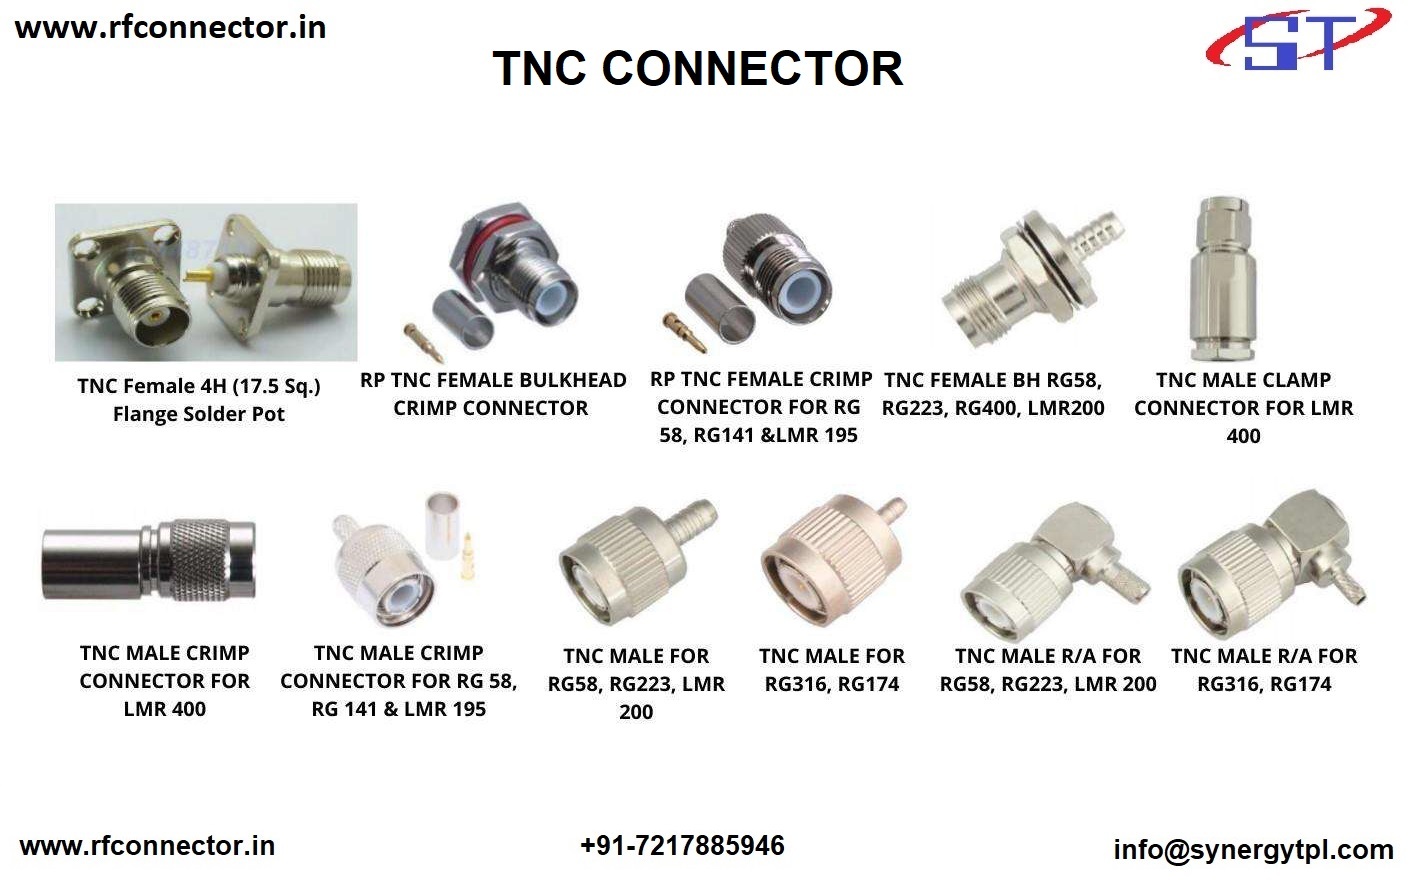 TNC male right angle clamp connector for LMR 300 cable